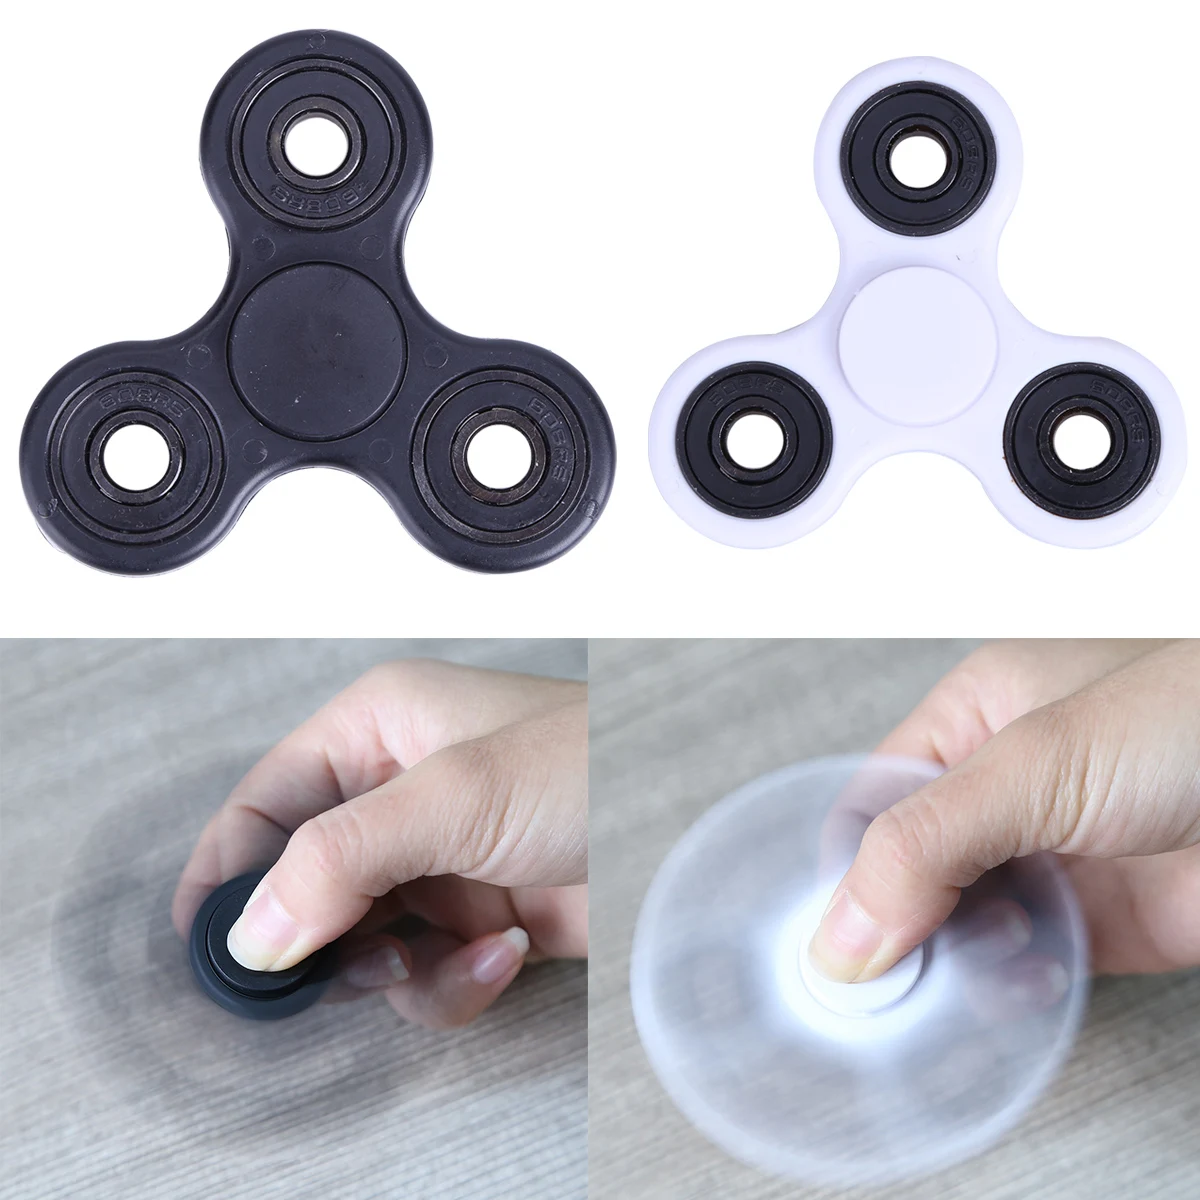 

Triangle Hand Finger Spinner Fidget Toy Kids EDC Hand Spinner for Autism ADHD Anxiety Stress Relieve Focus Toys Children Gifts